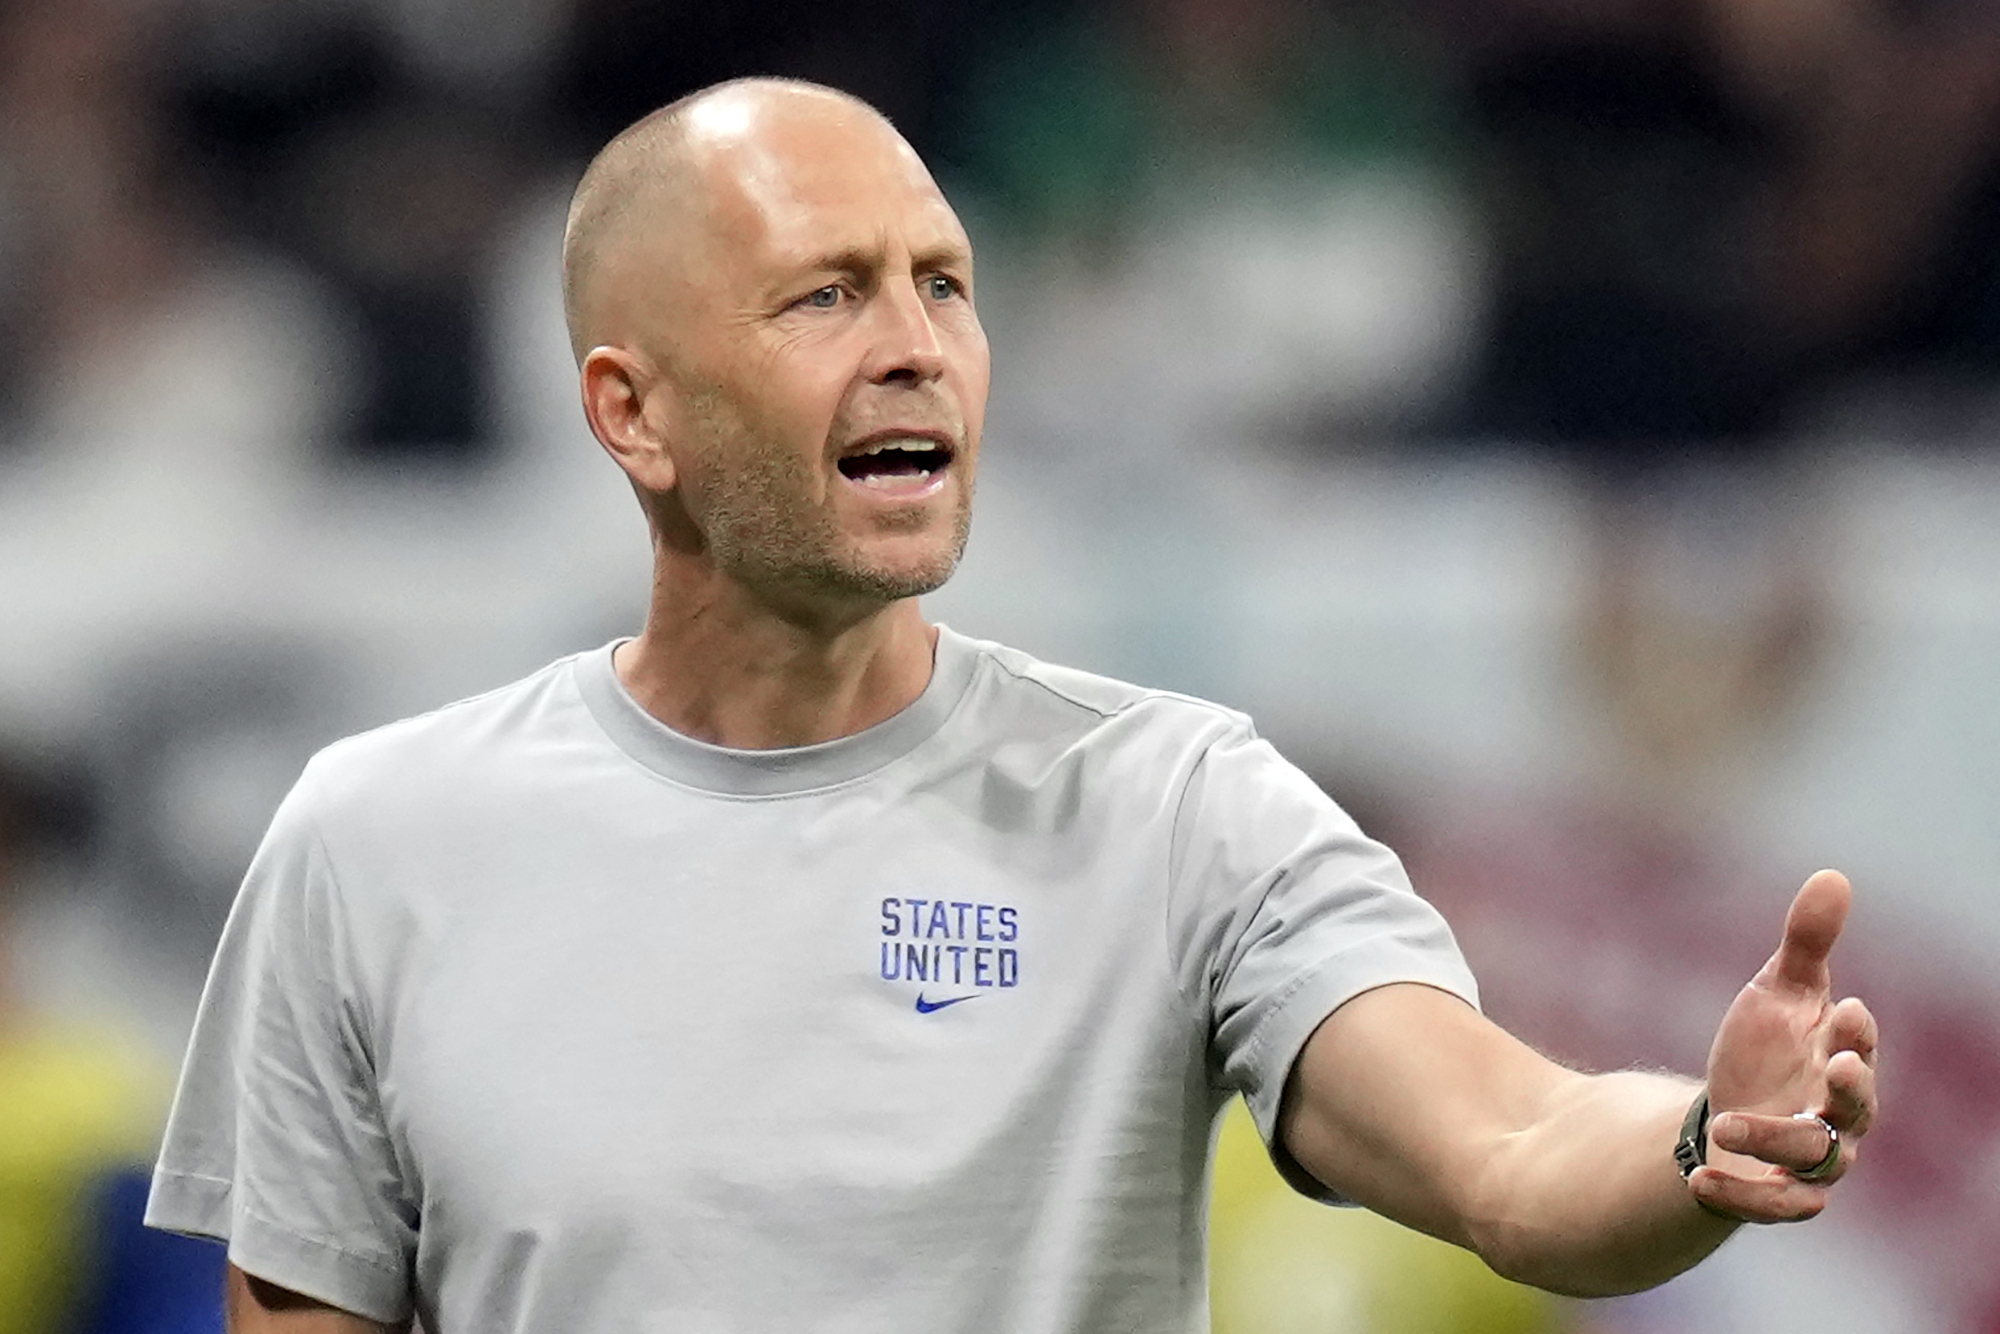 U.S. men's nation team soccer coach Gregg Berhalter coaches during the World Cup game between England and the U.S. in Al Khor, Qatar, on Nov. 25.